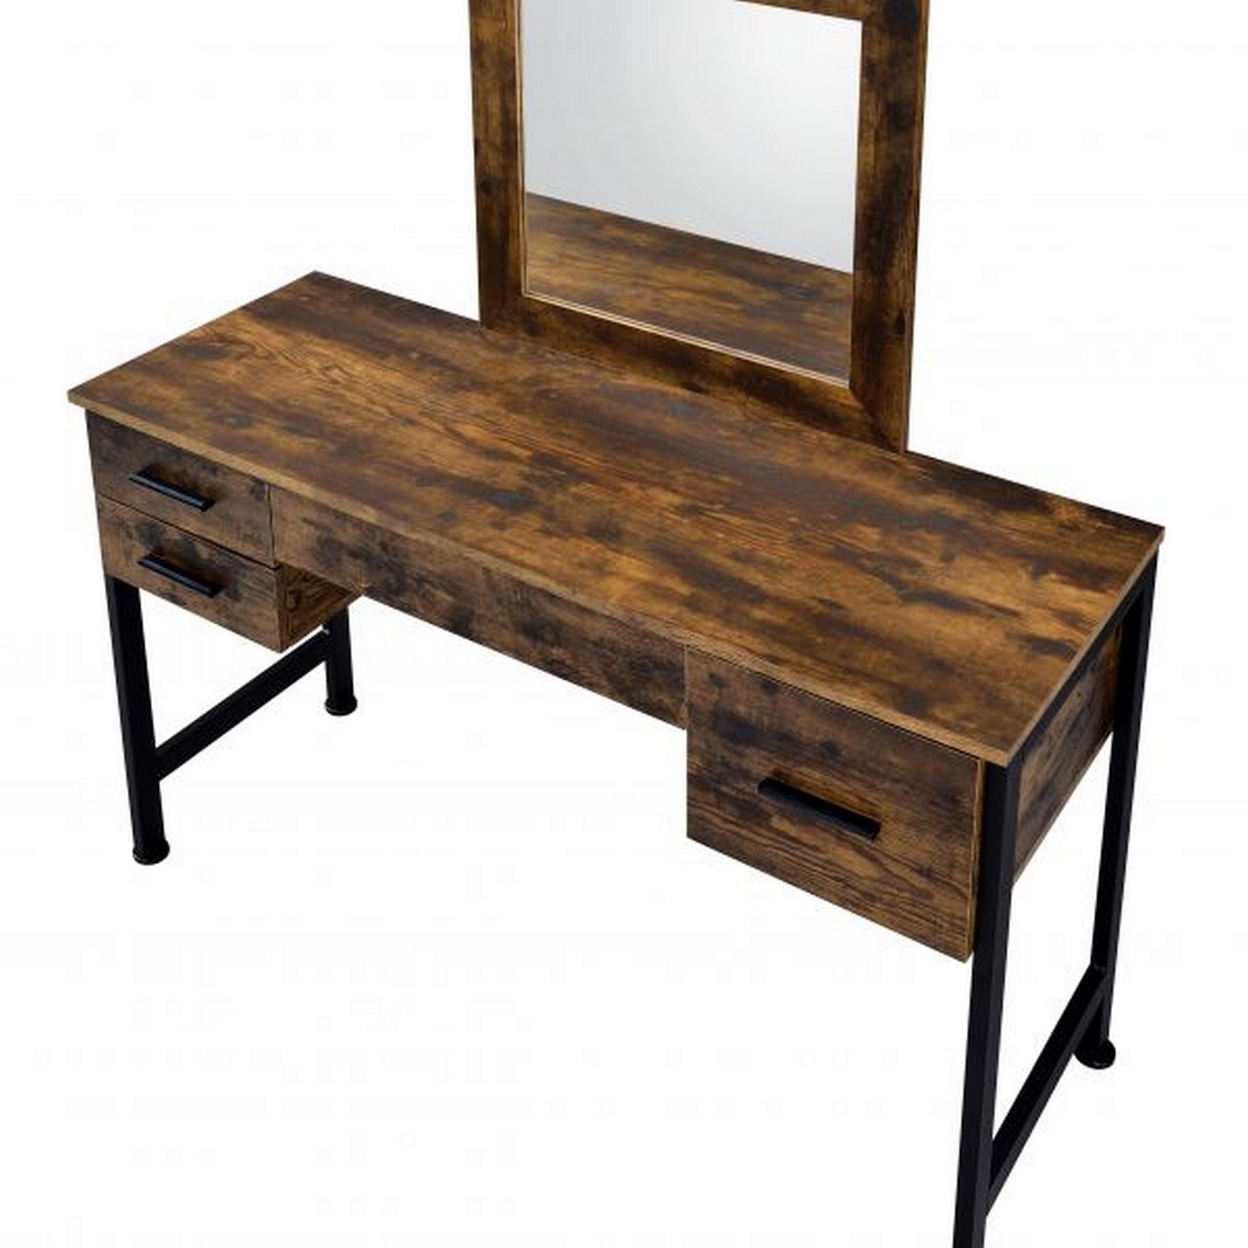 Vanity Desk With 4 Drawers And Square Mirror, Brown And Black- Saltoro Sherpi